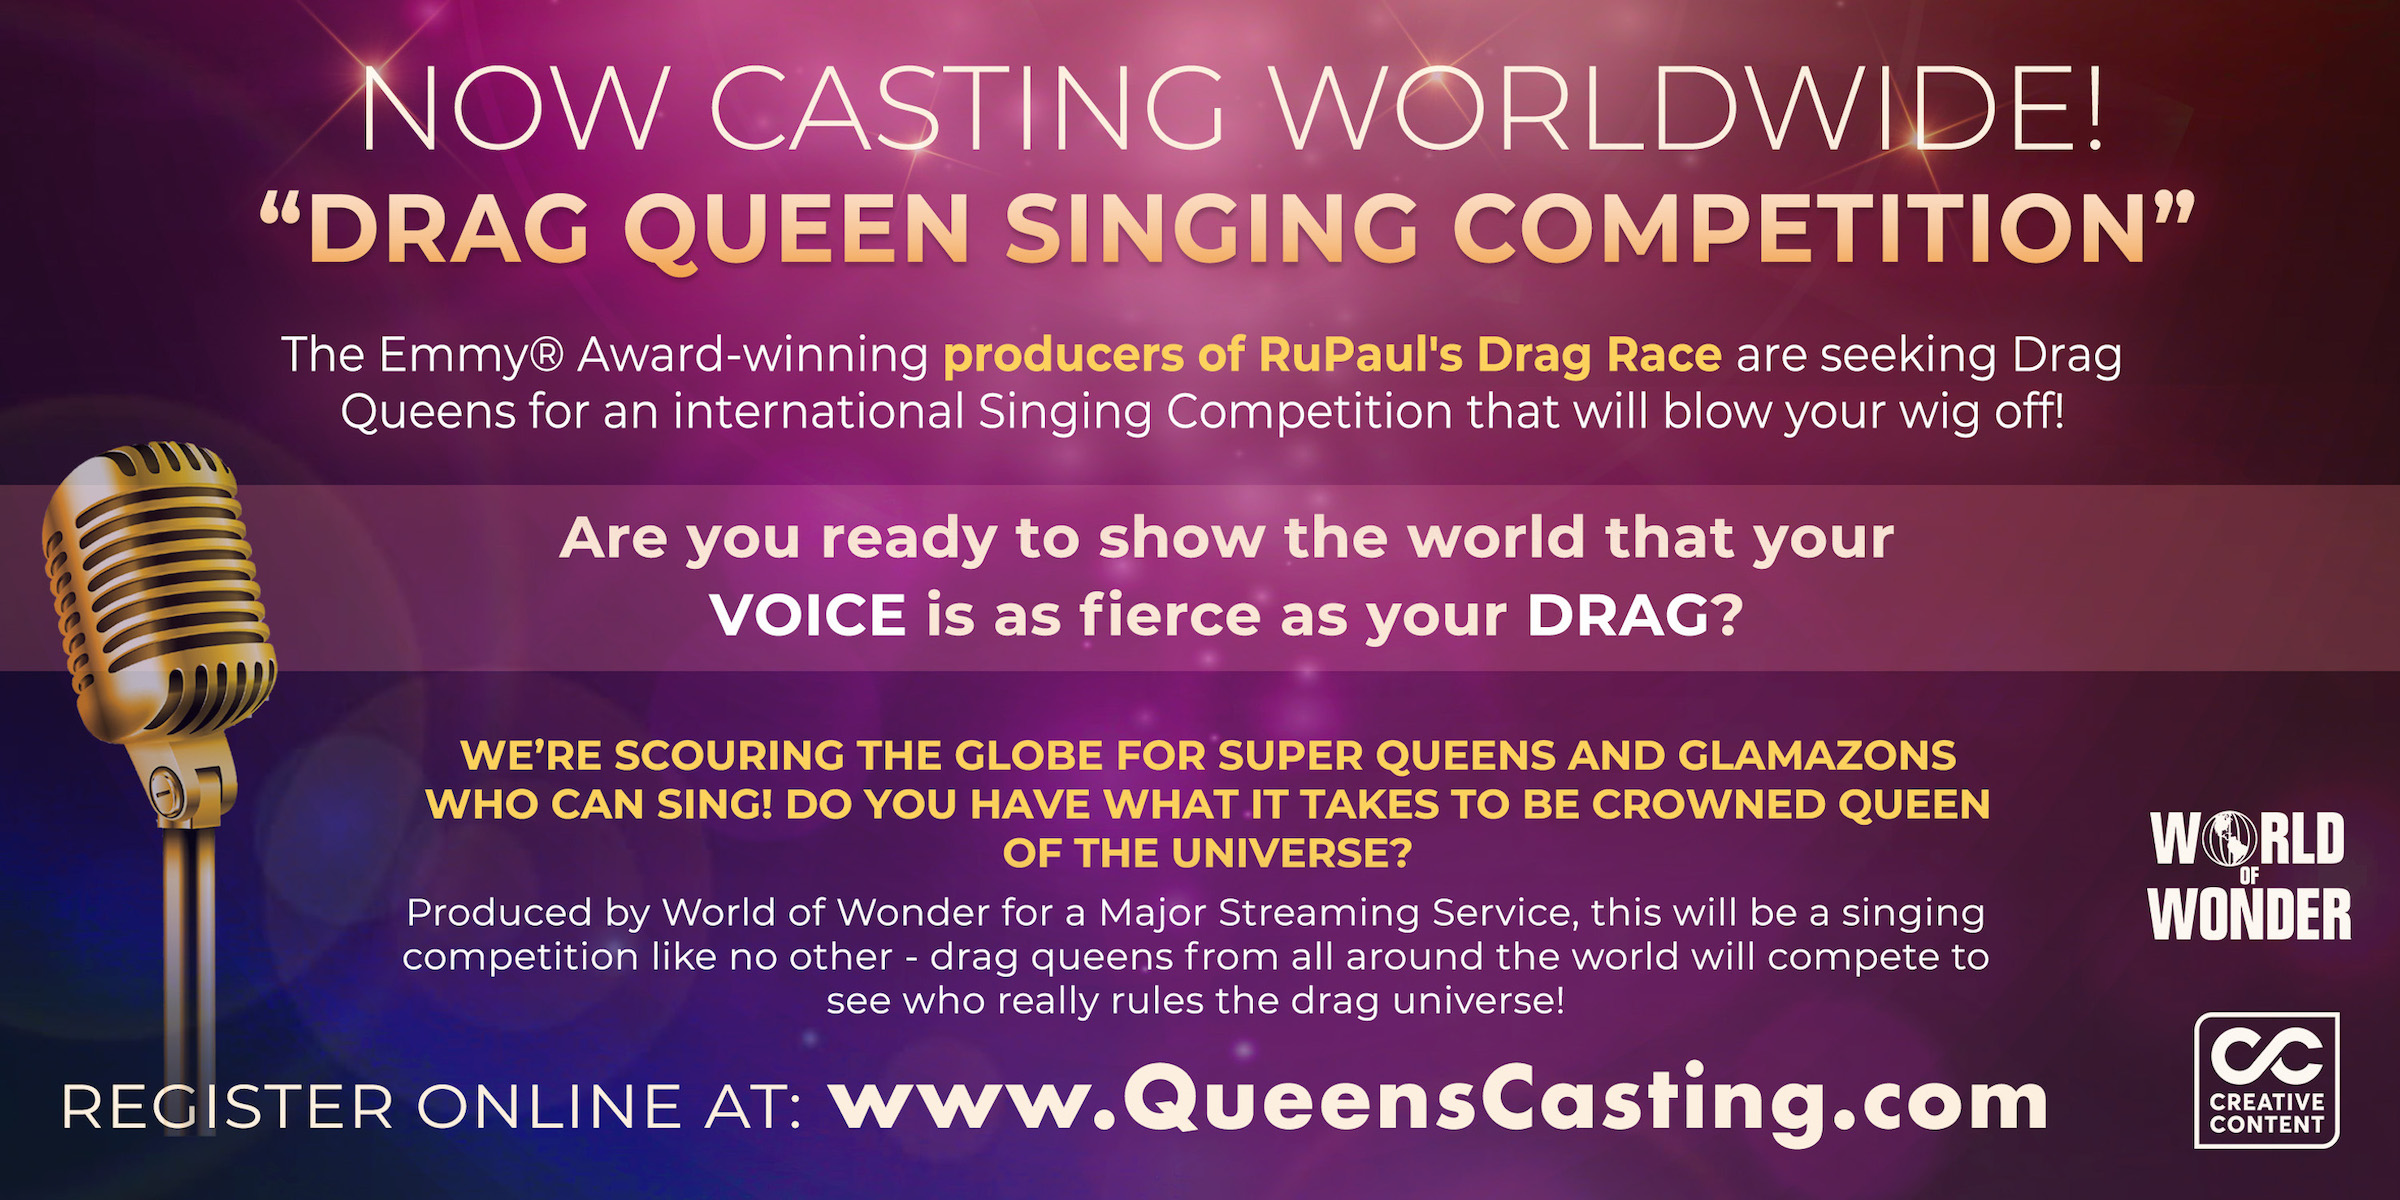 QUEEN OF THE UNIVERSE CASTING